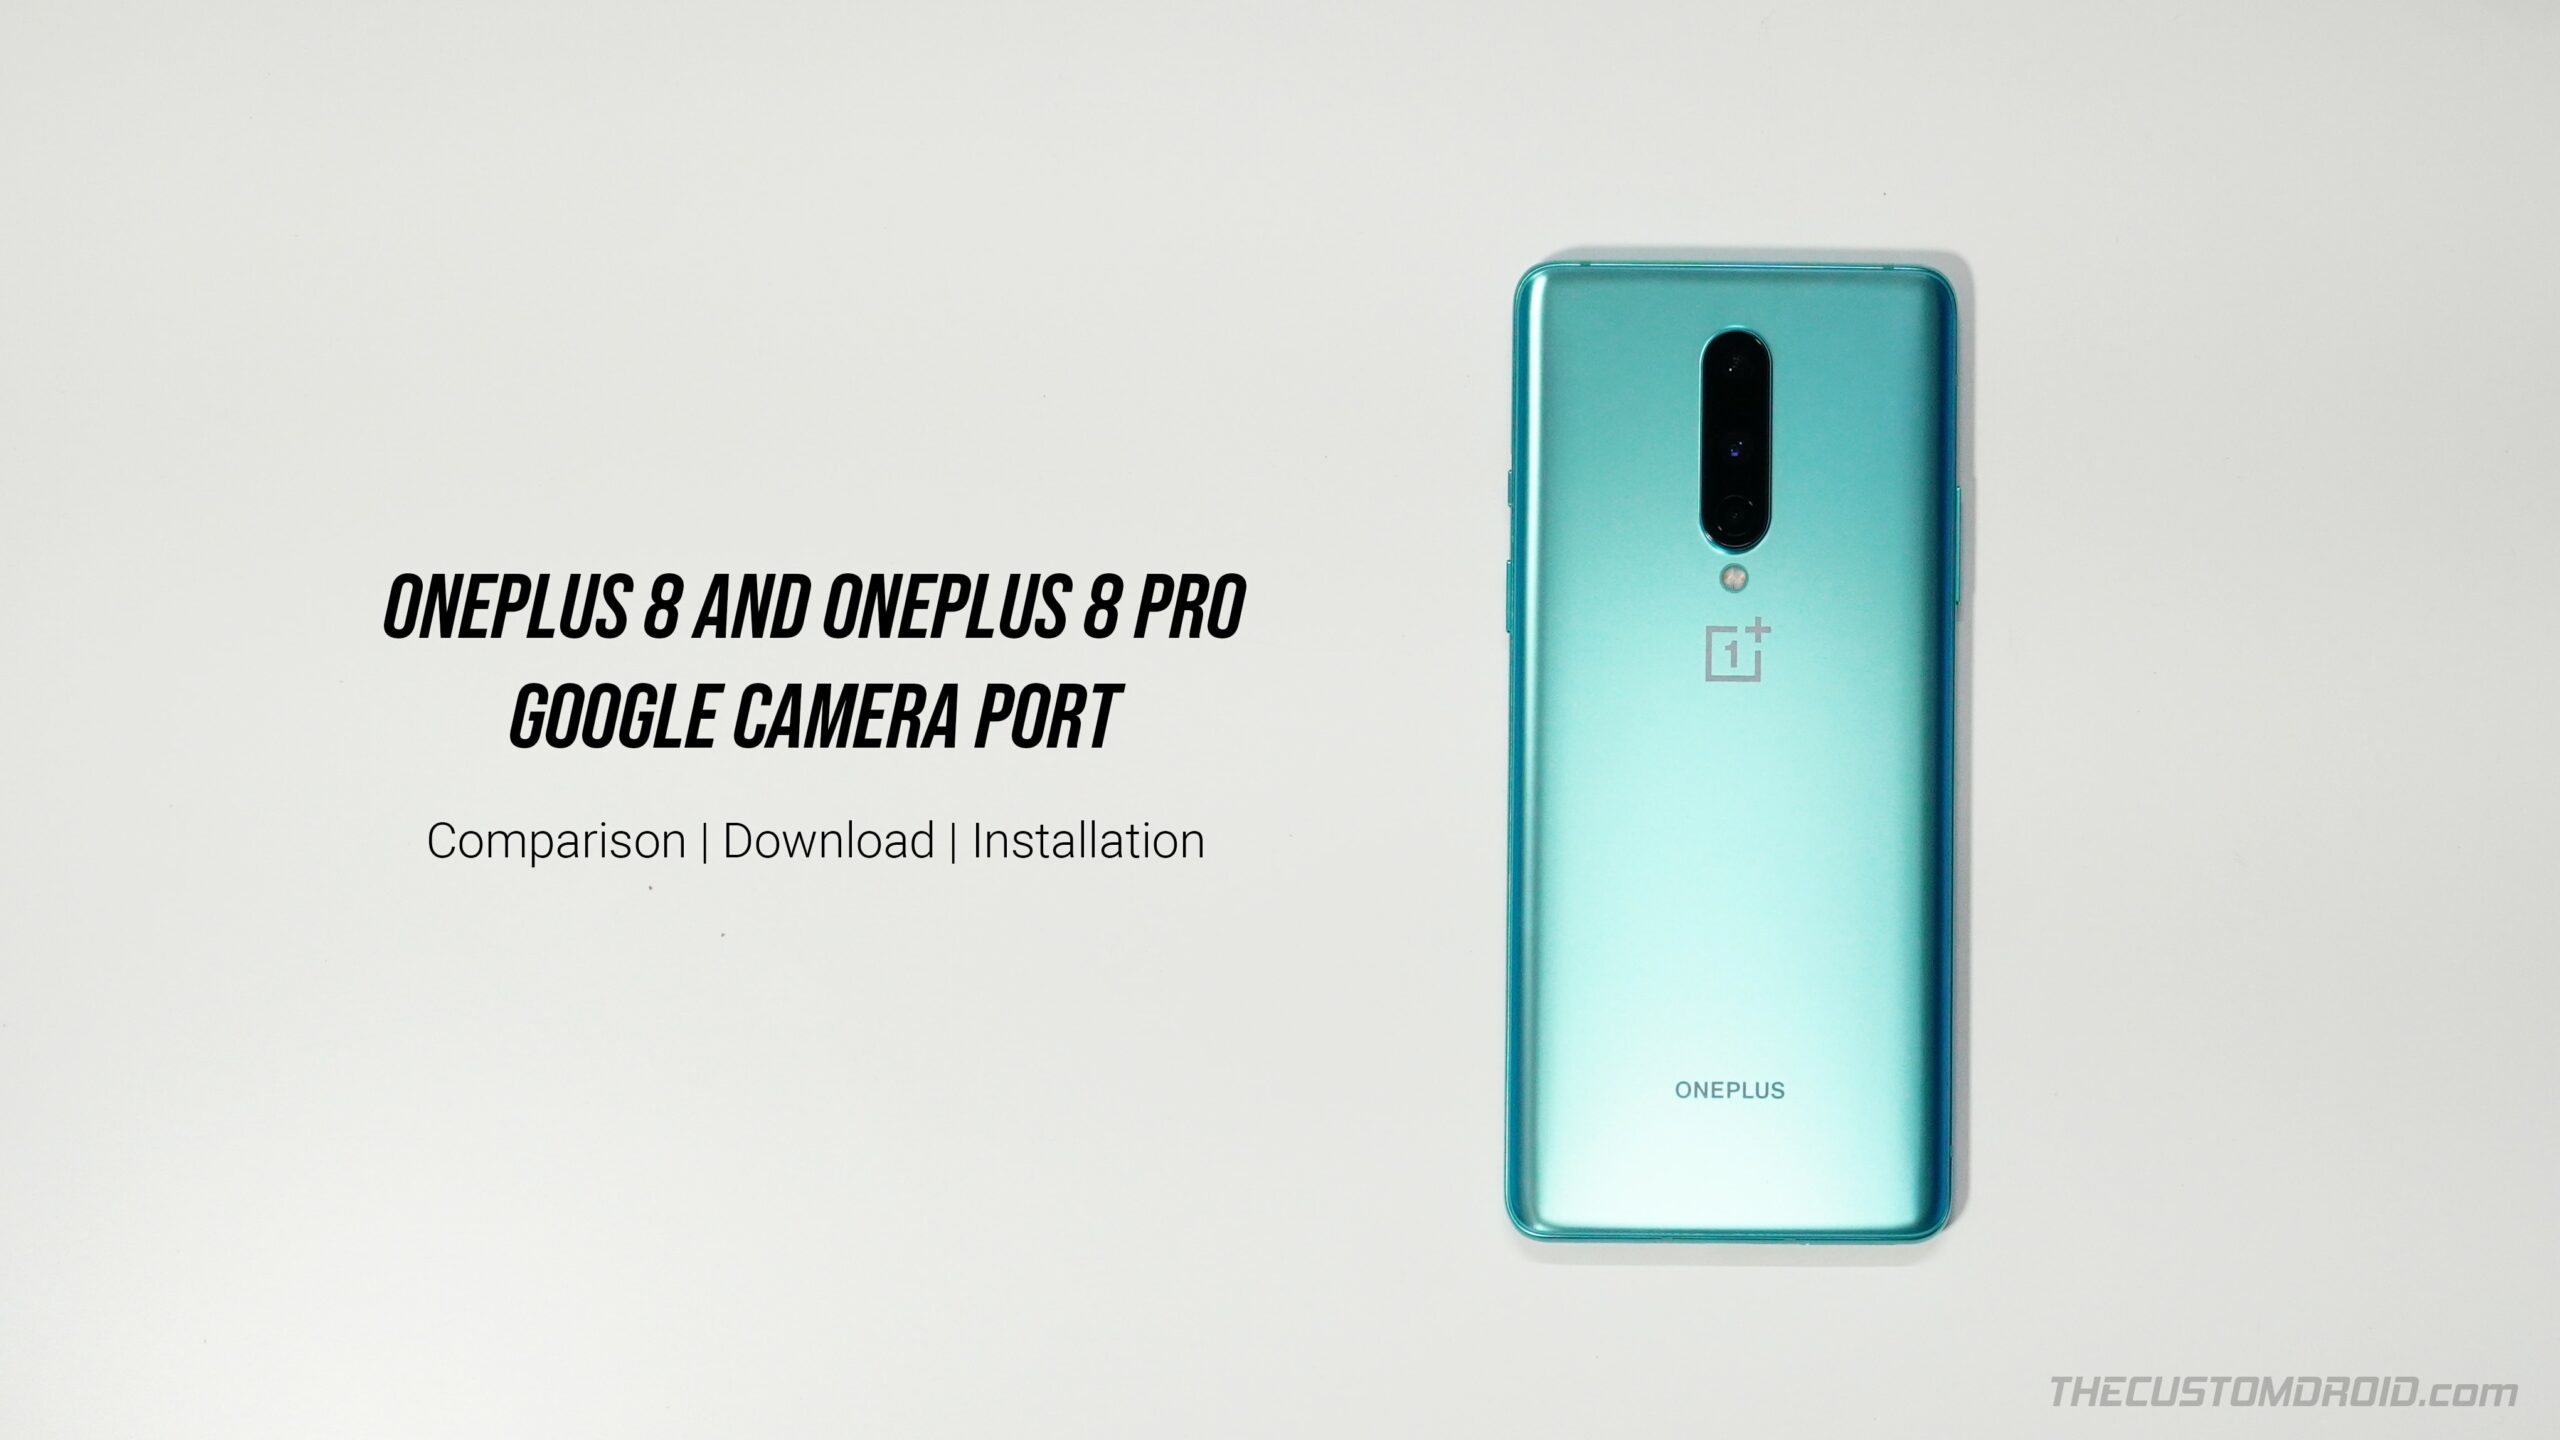 Google Camera Port for OnePlus 8/OnePlus 8 Pro - Comparison, APK Download, and Installation